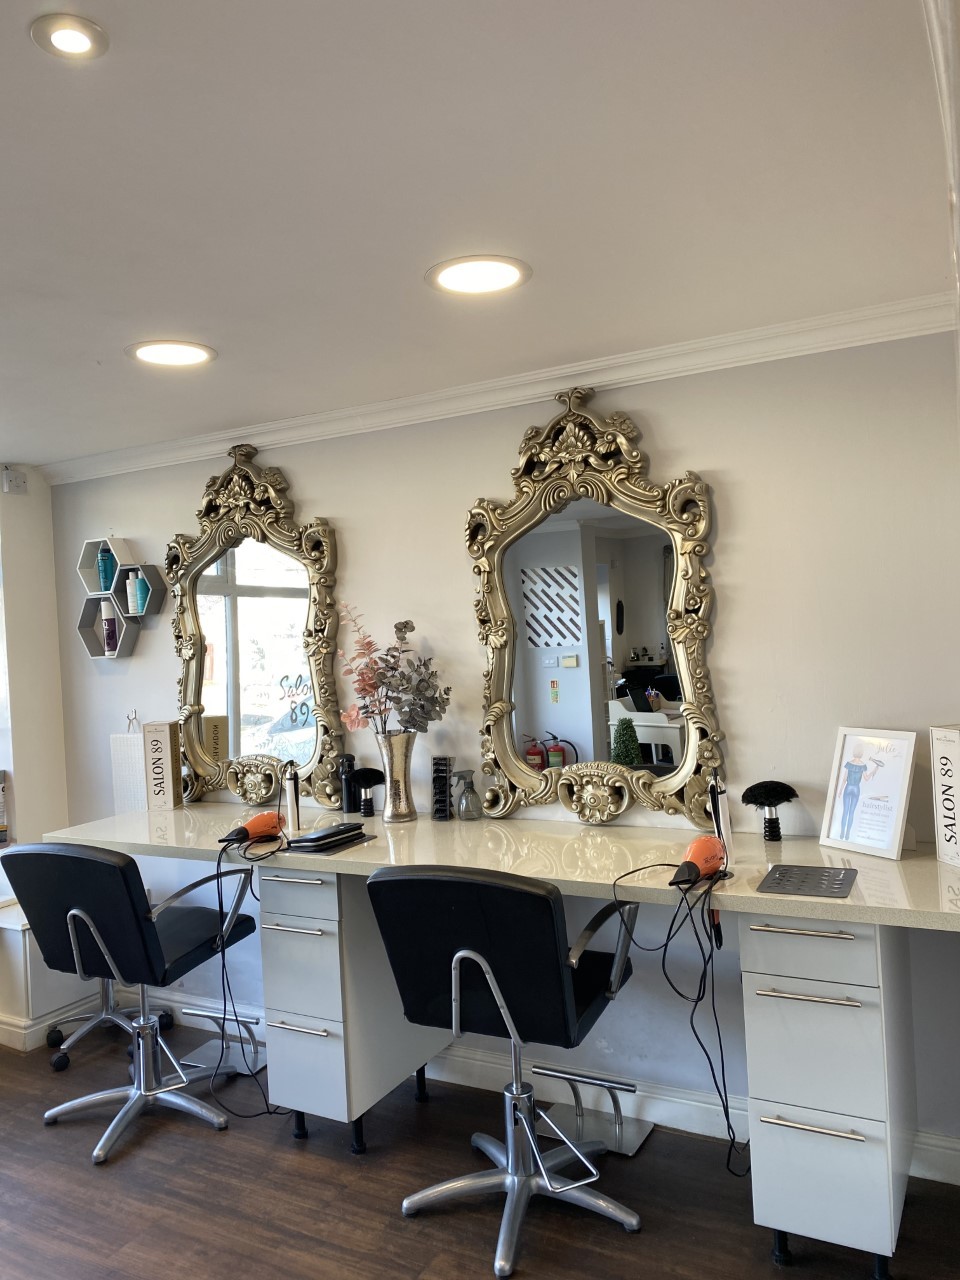 The Orford salon has become a warm hub for customers and non-customers over the past few weeks